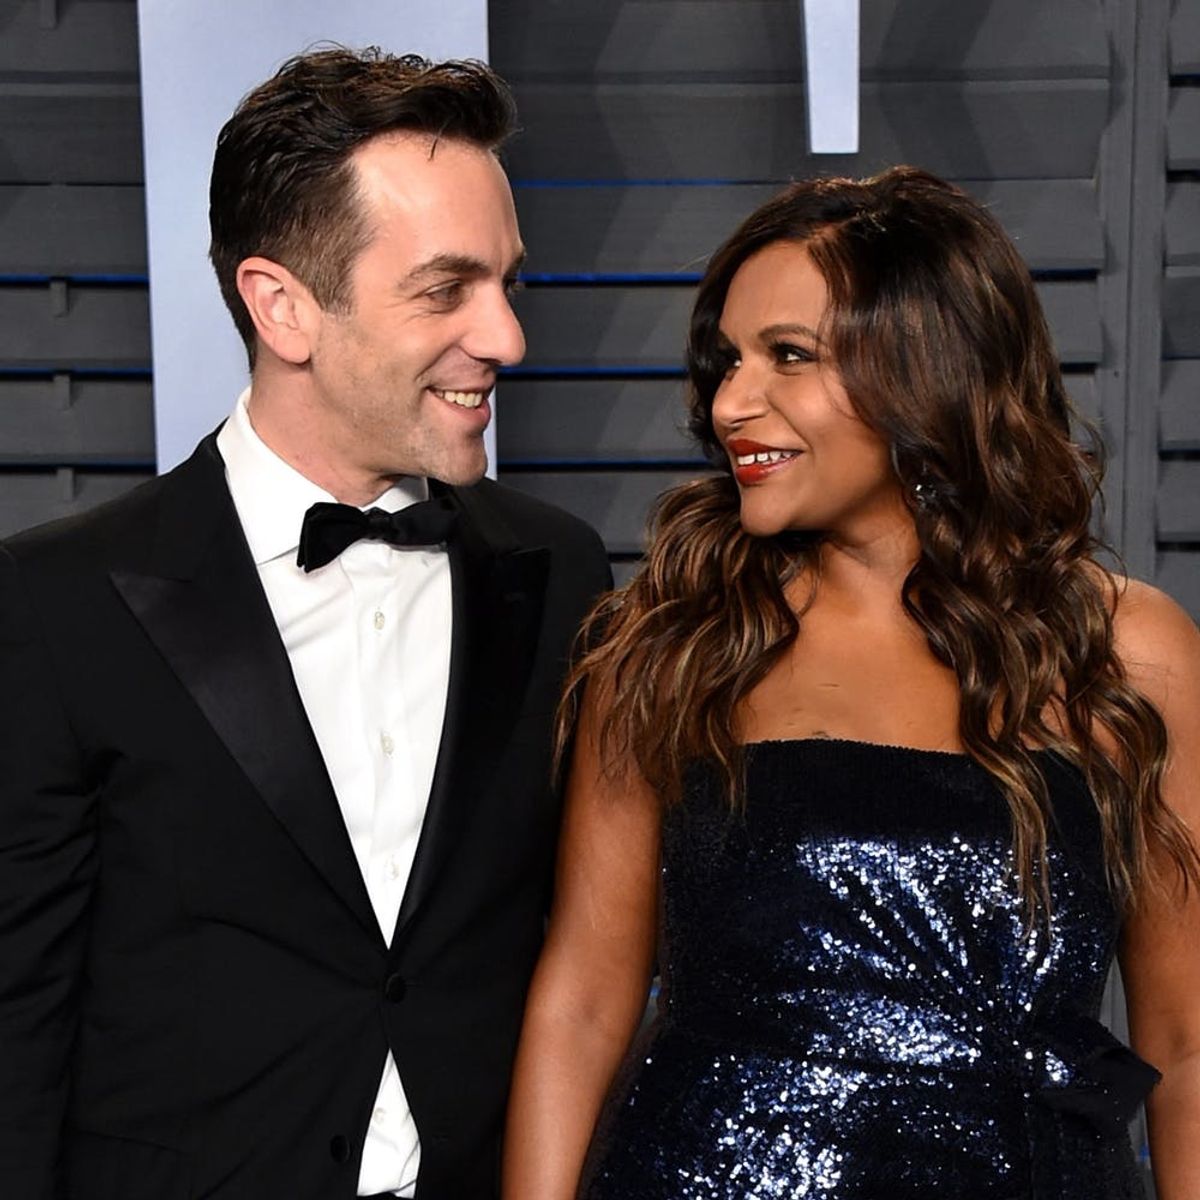 Mindy Kaling Teared Up Over BJ Novak’s Sweet Note and Now We’re Crying Too